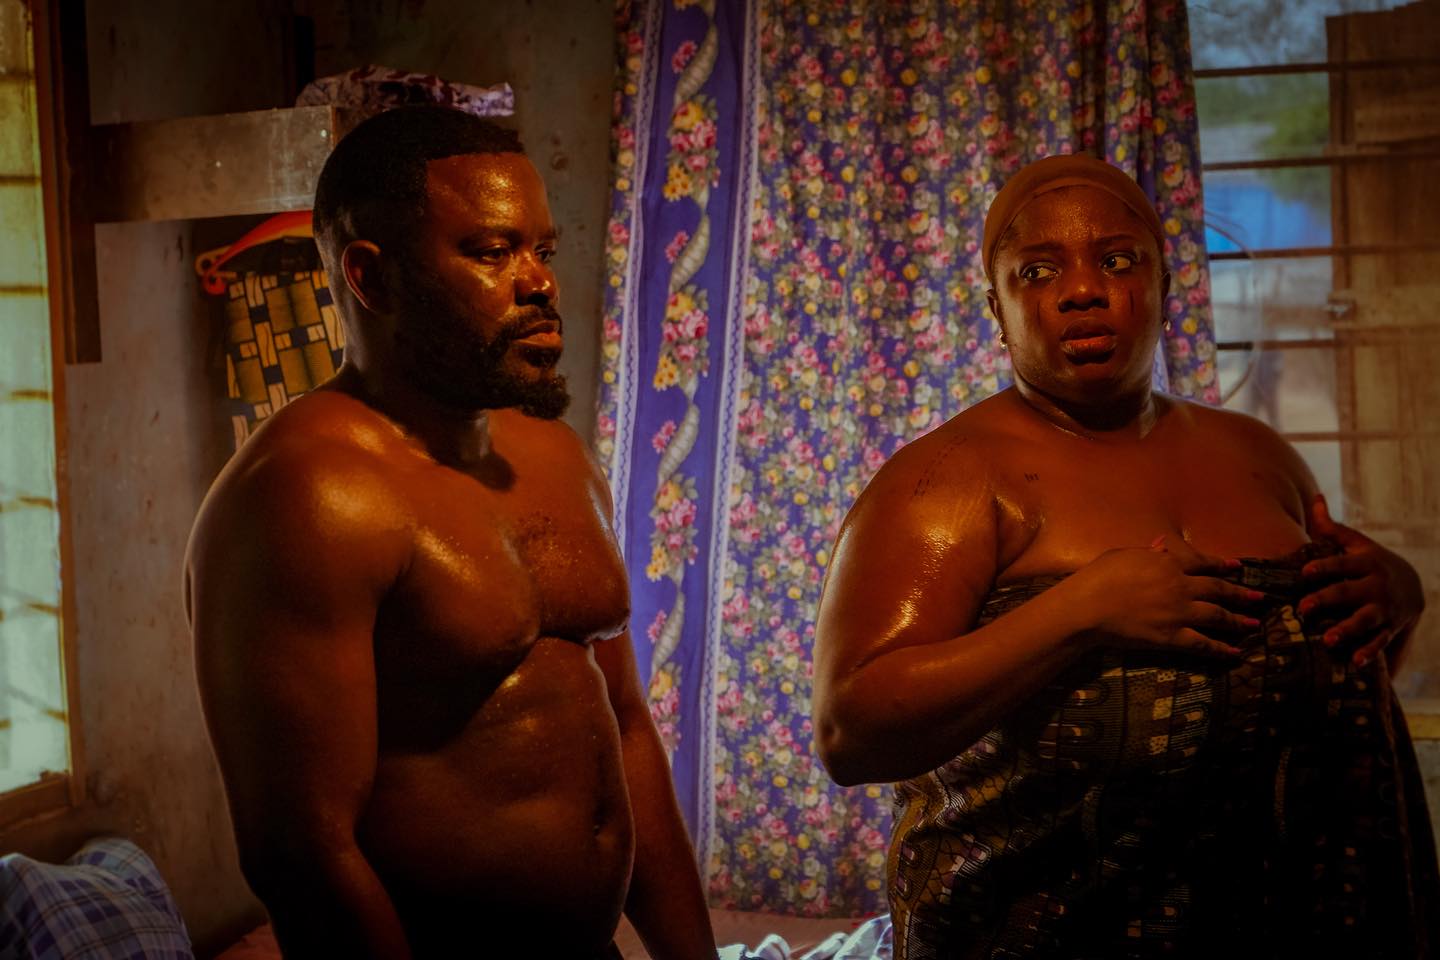 368019627 18379892449043697 7878672430064509926 n - IJOGBON: Kunle Afolayan's Young Adult Feature Film - What We Know So Far